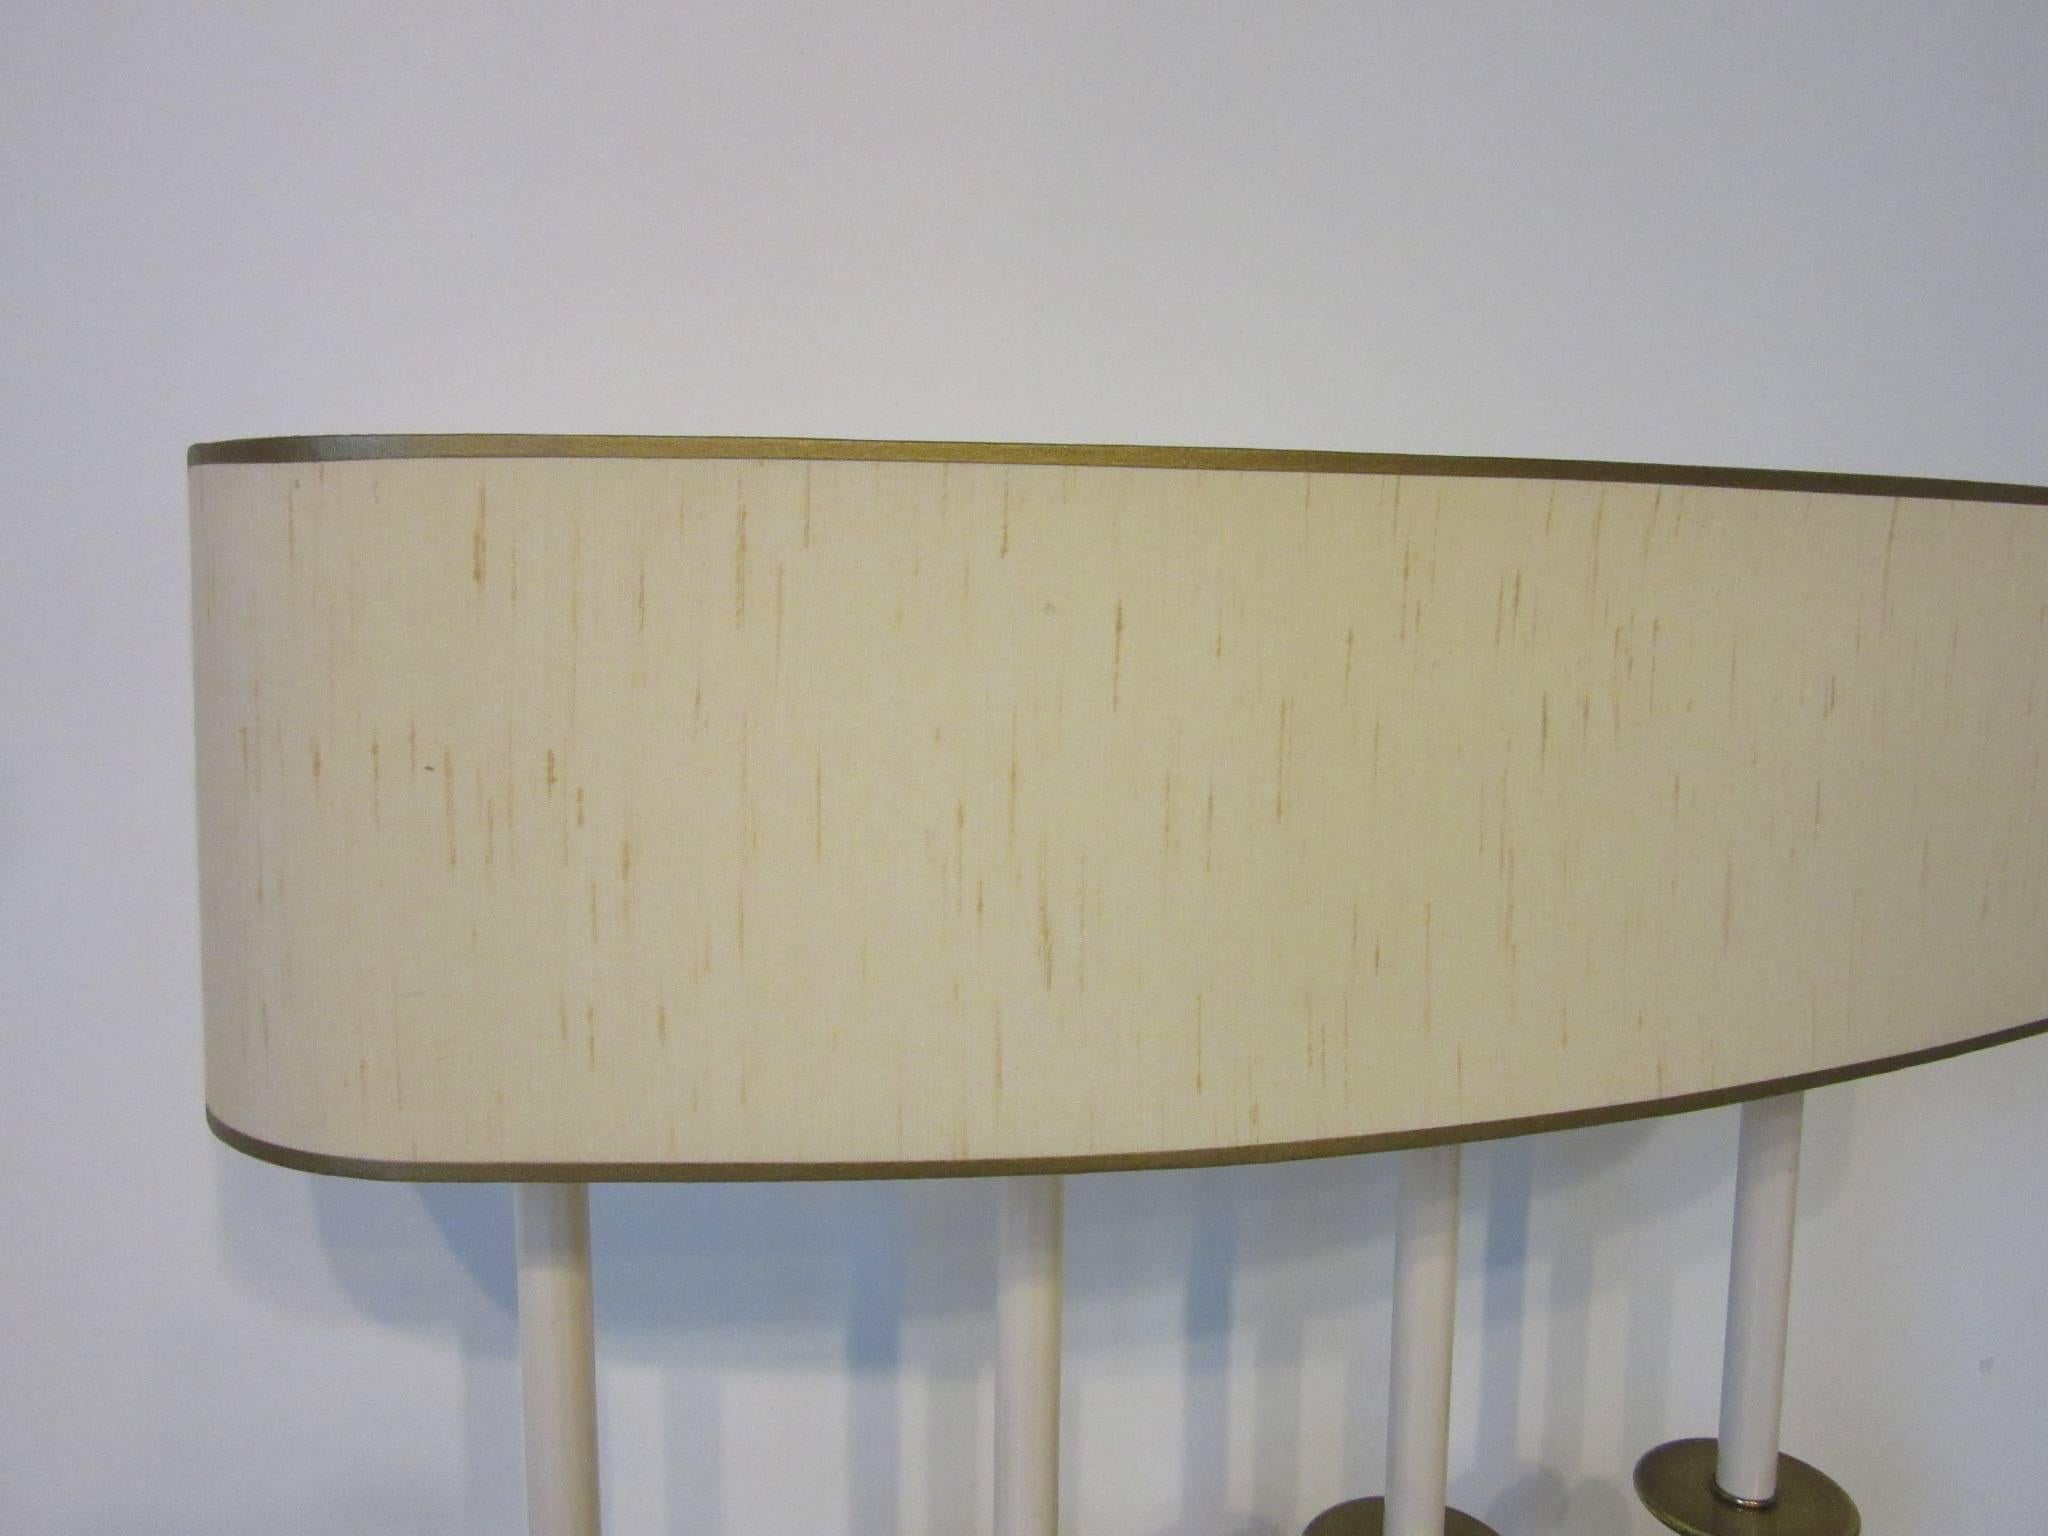 Brass / Brushed Metal Table Lamp in the style of Stiffel and Parzinger In Good Condition For Sale In Cincinnati, OH